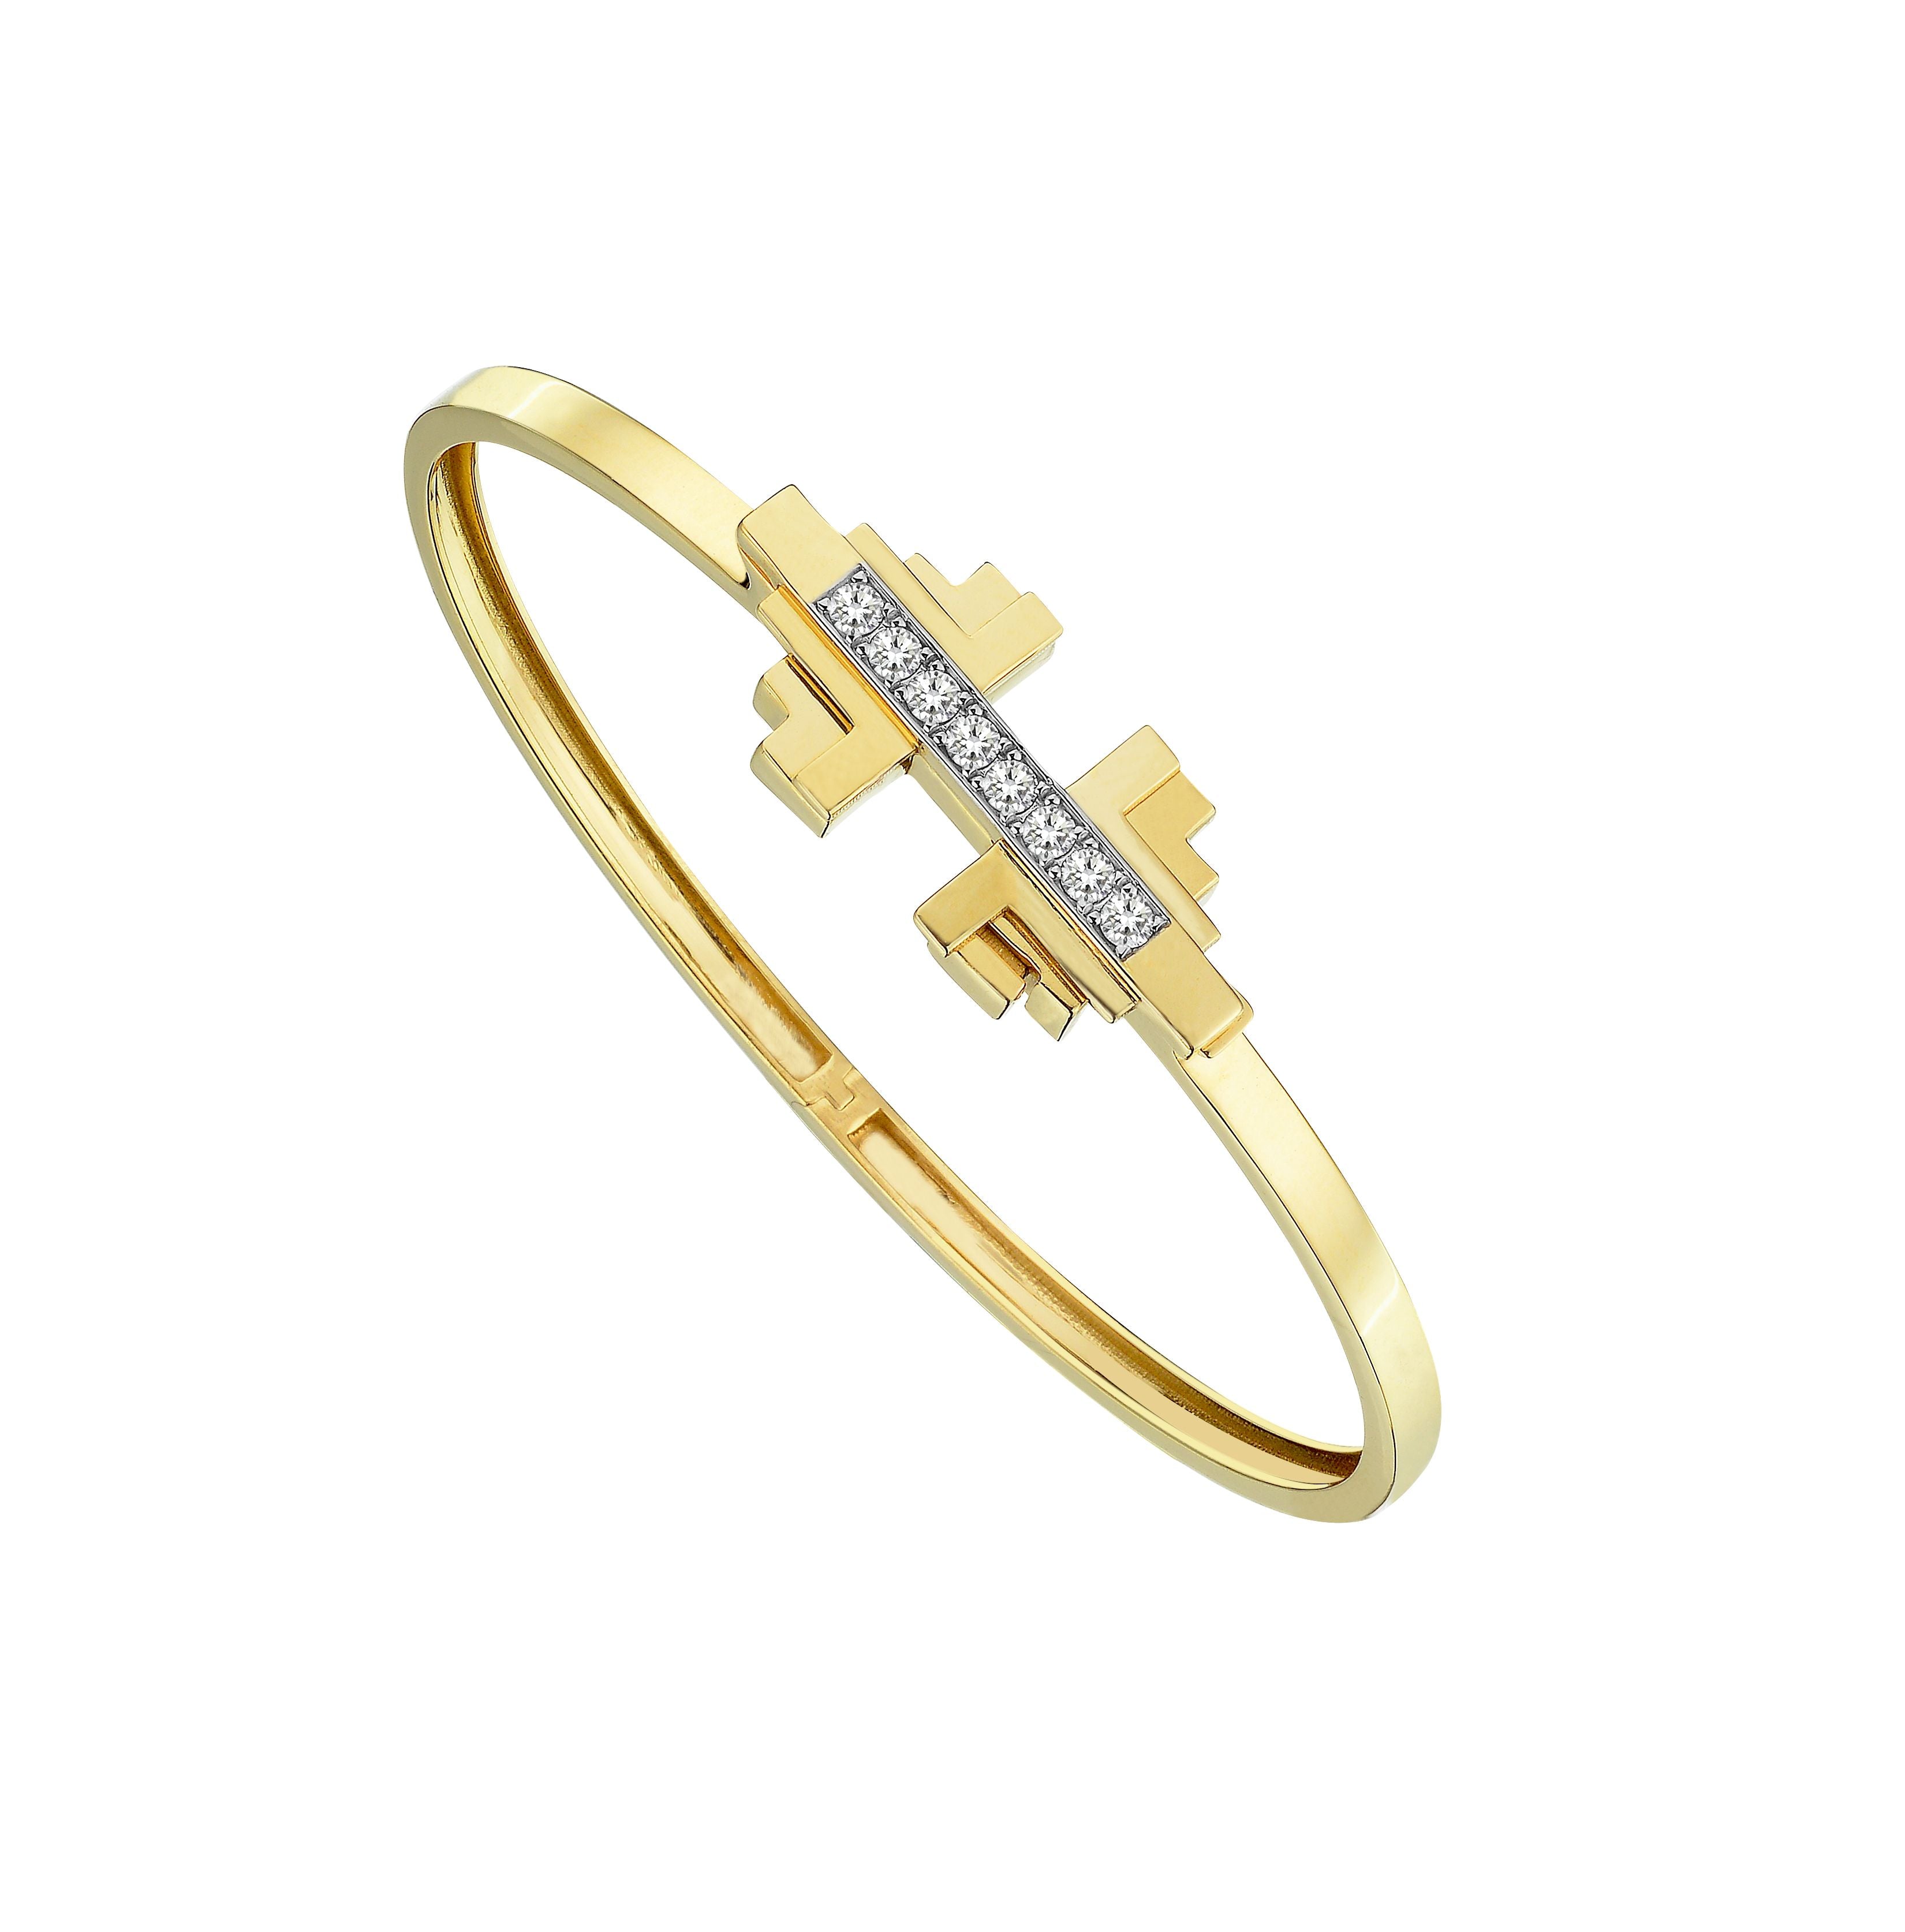 Empire Bracelet in Yellow Gold - Her Story Shop